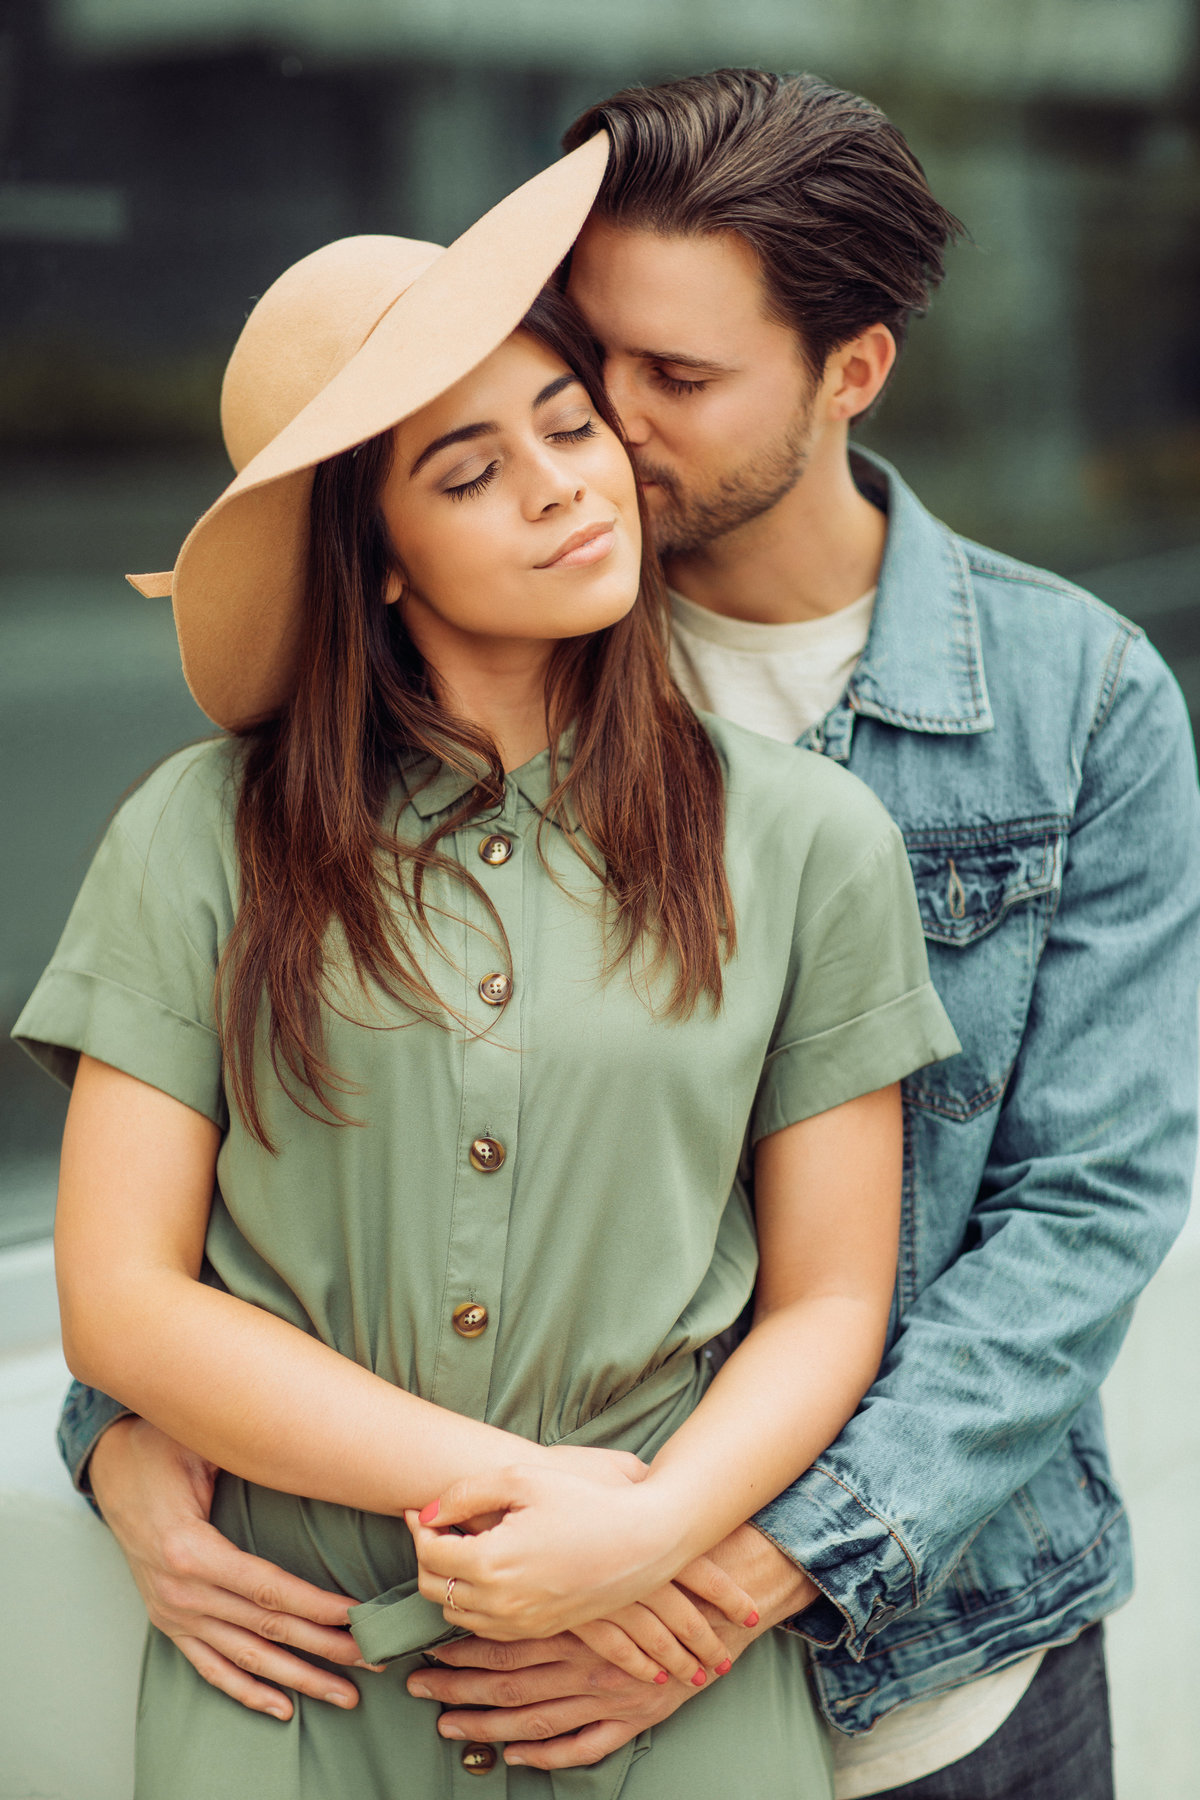 Engagement Photography Of Couple Together